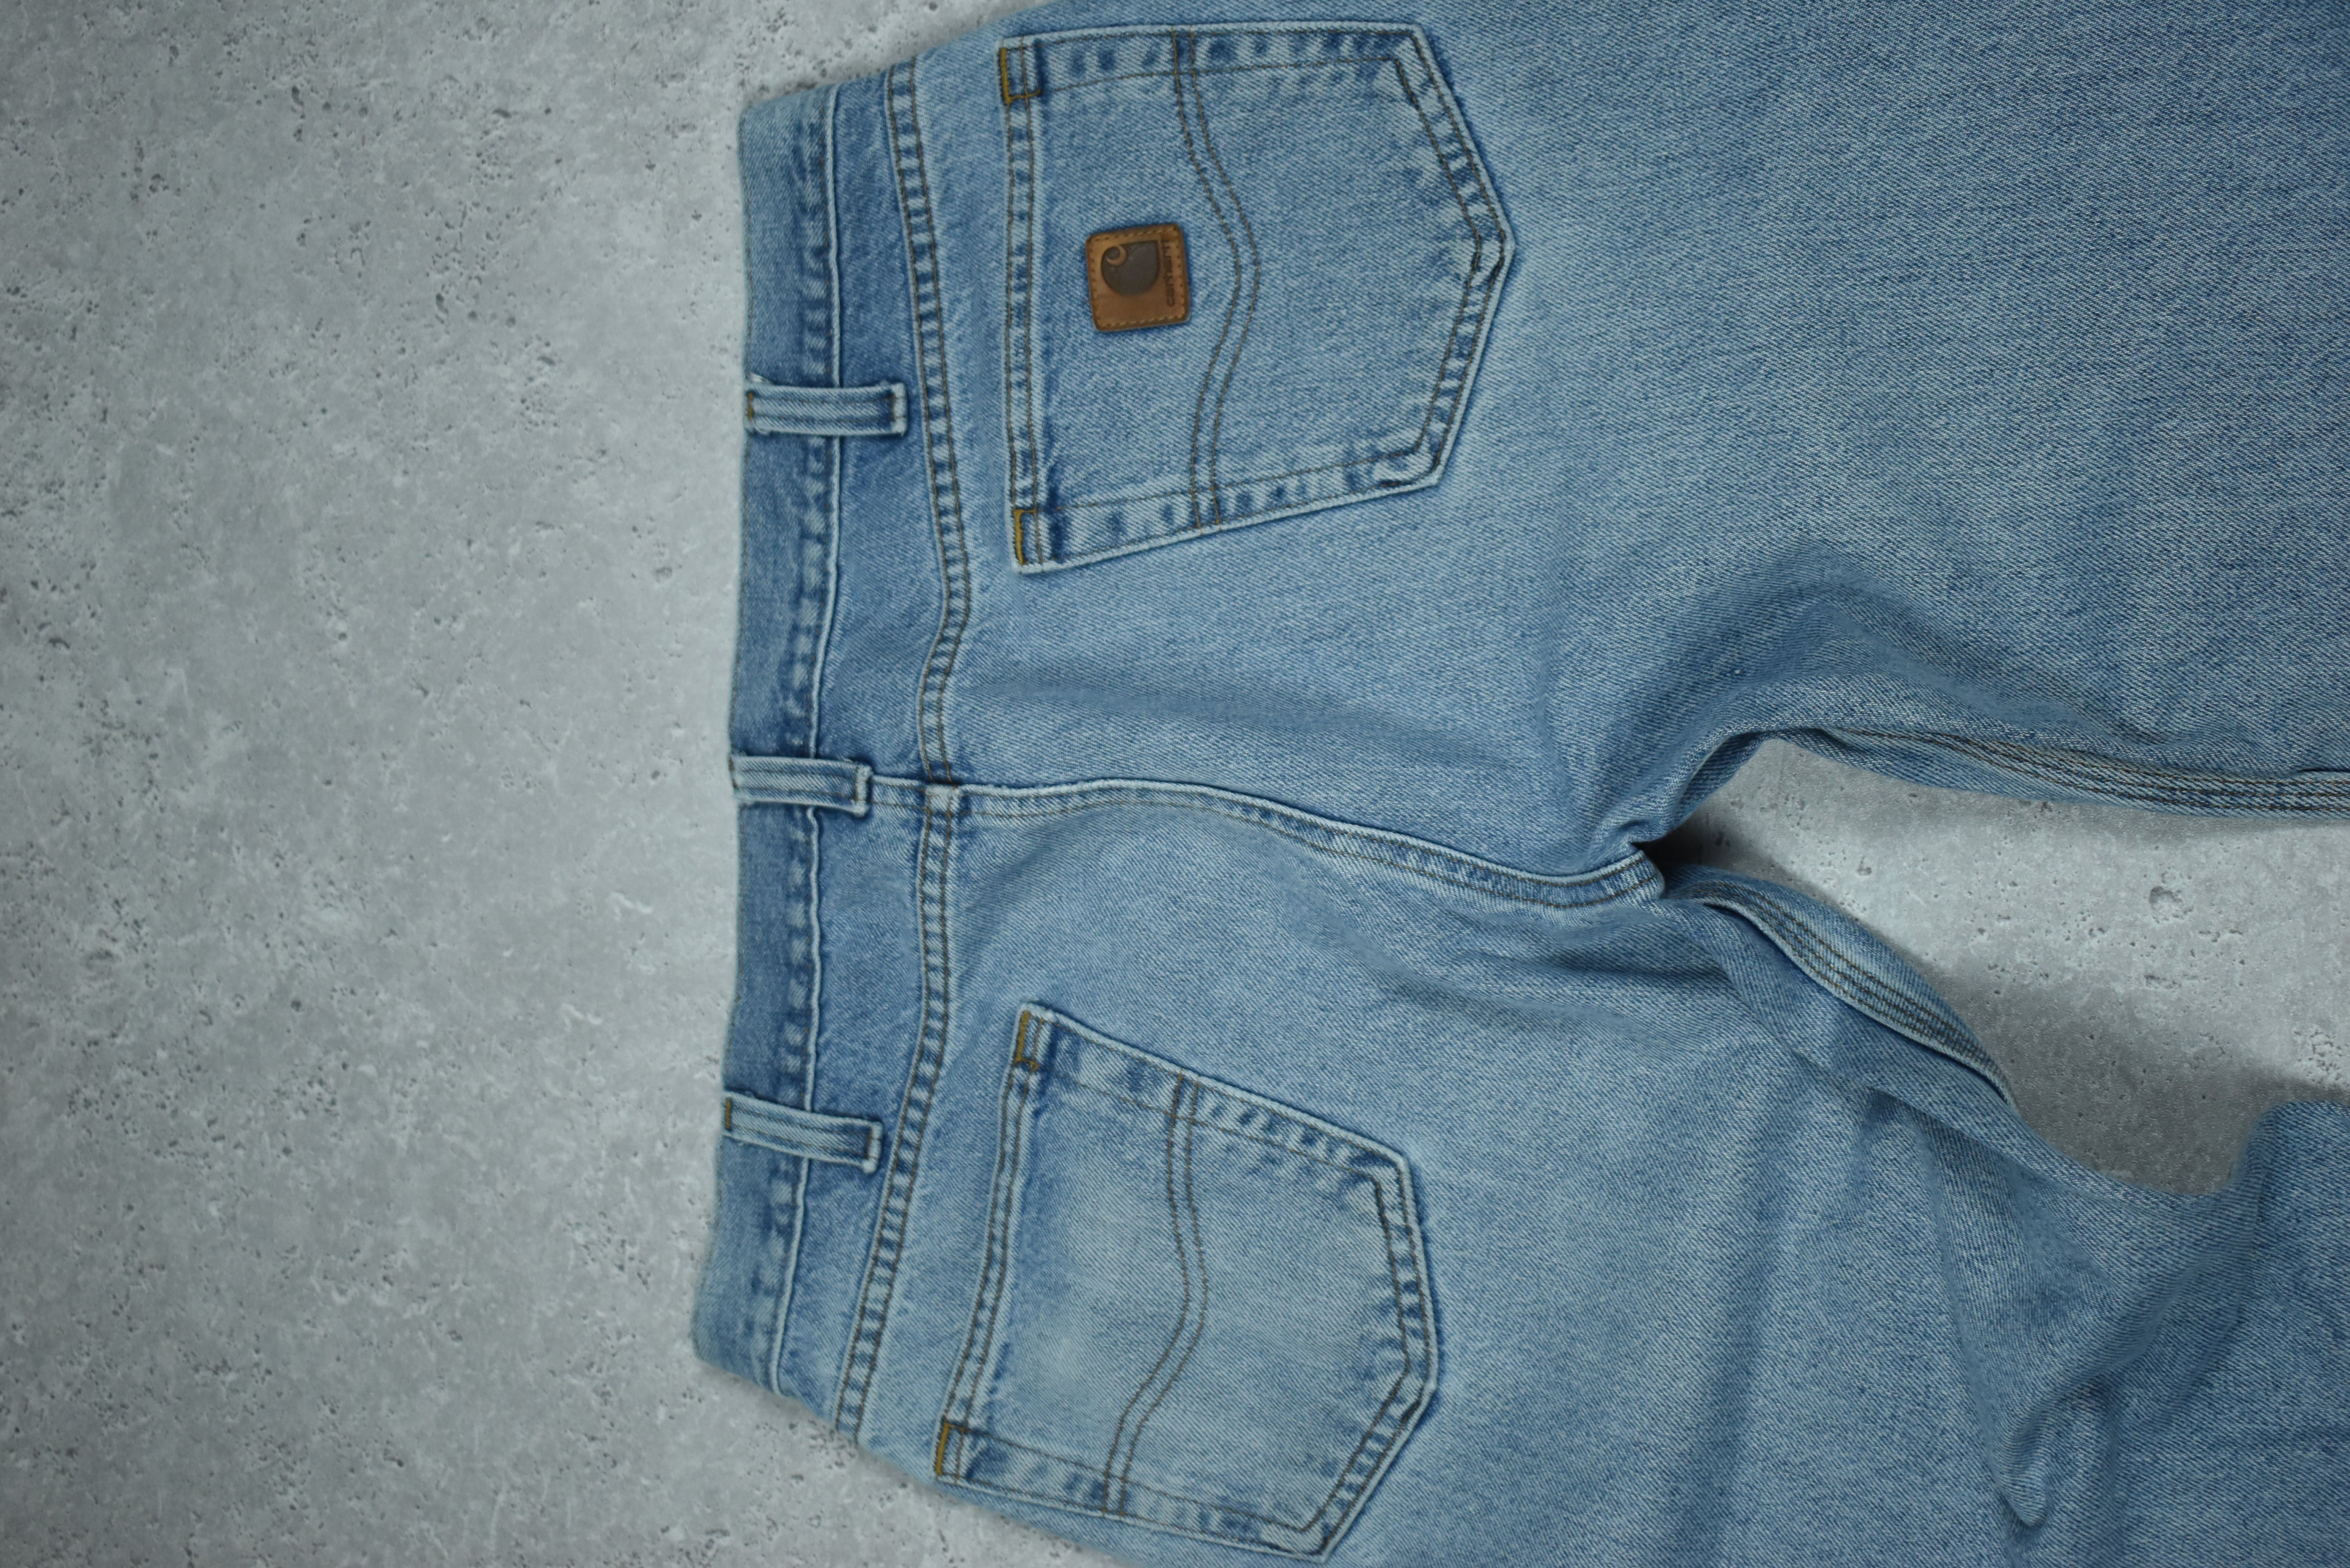 Vintage Carhartt Dungaree Fit Jeans 34x30